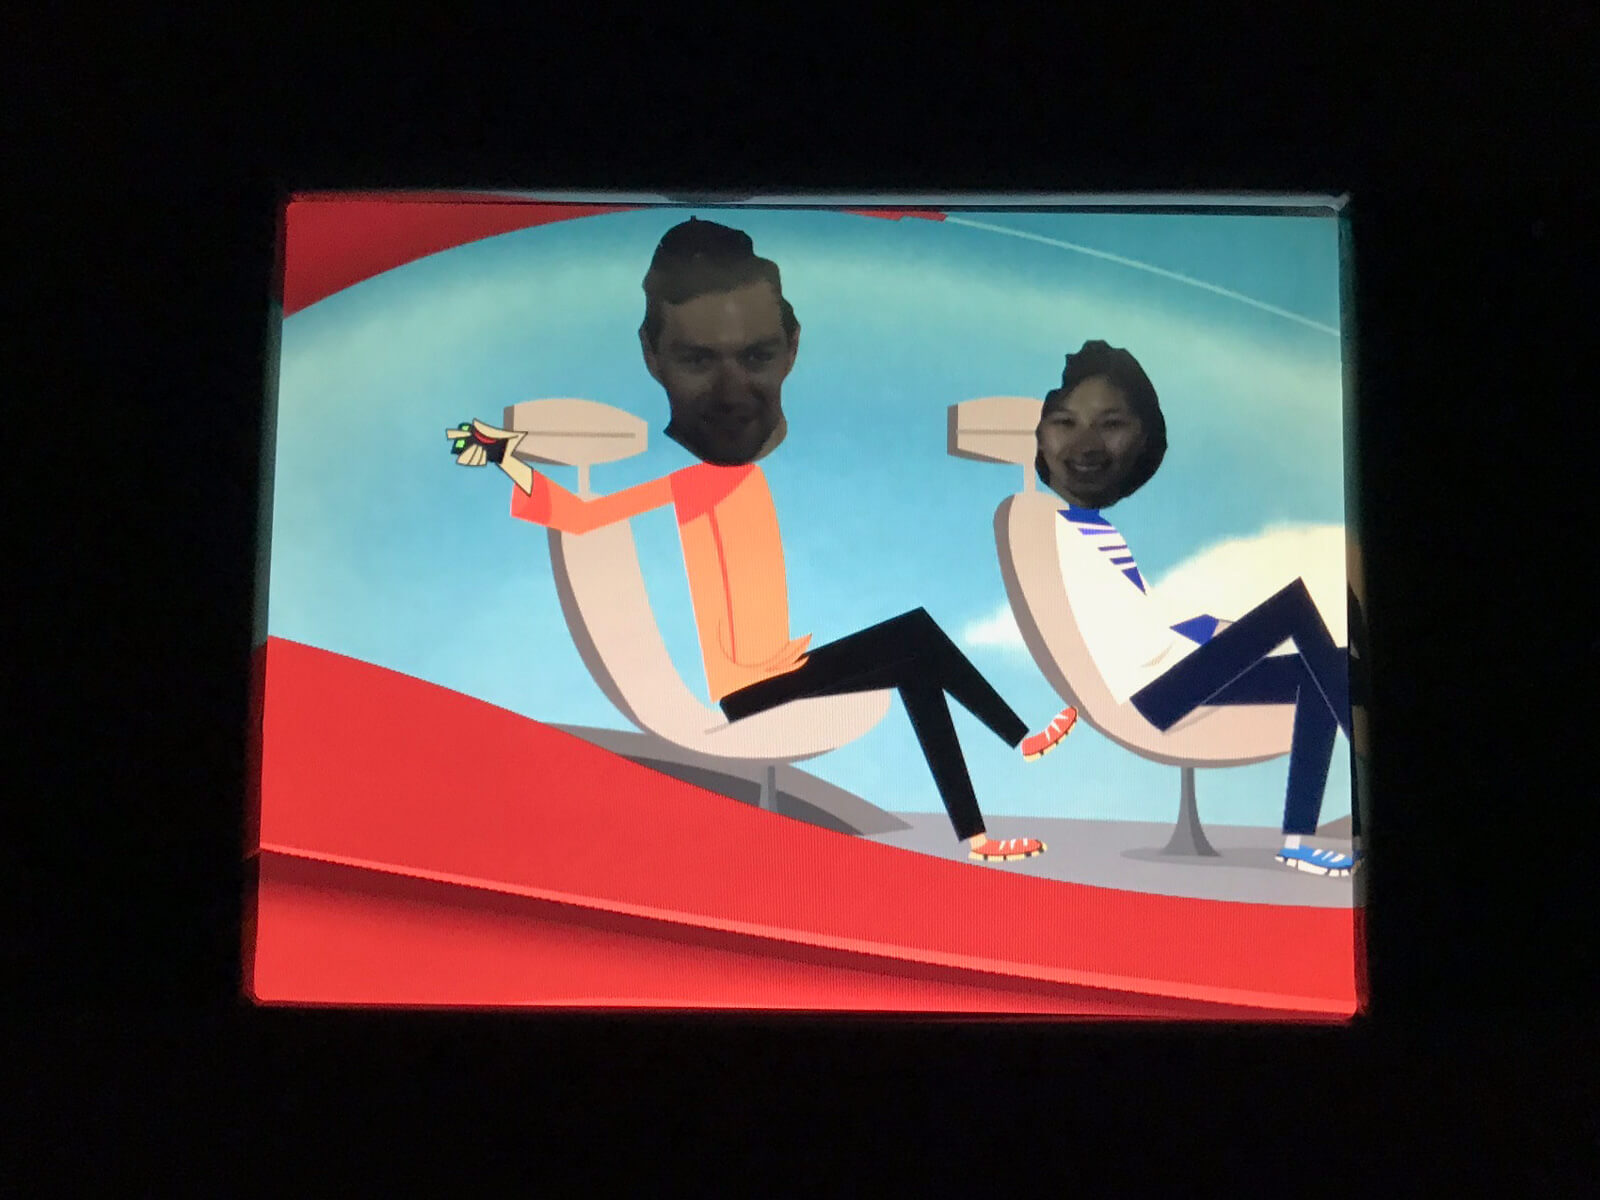 A screen showing two cartoon figures on chairs, with a man’s face and a woman’s face superimposed on them